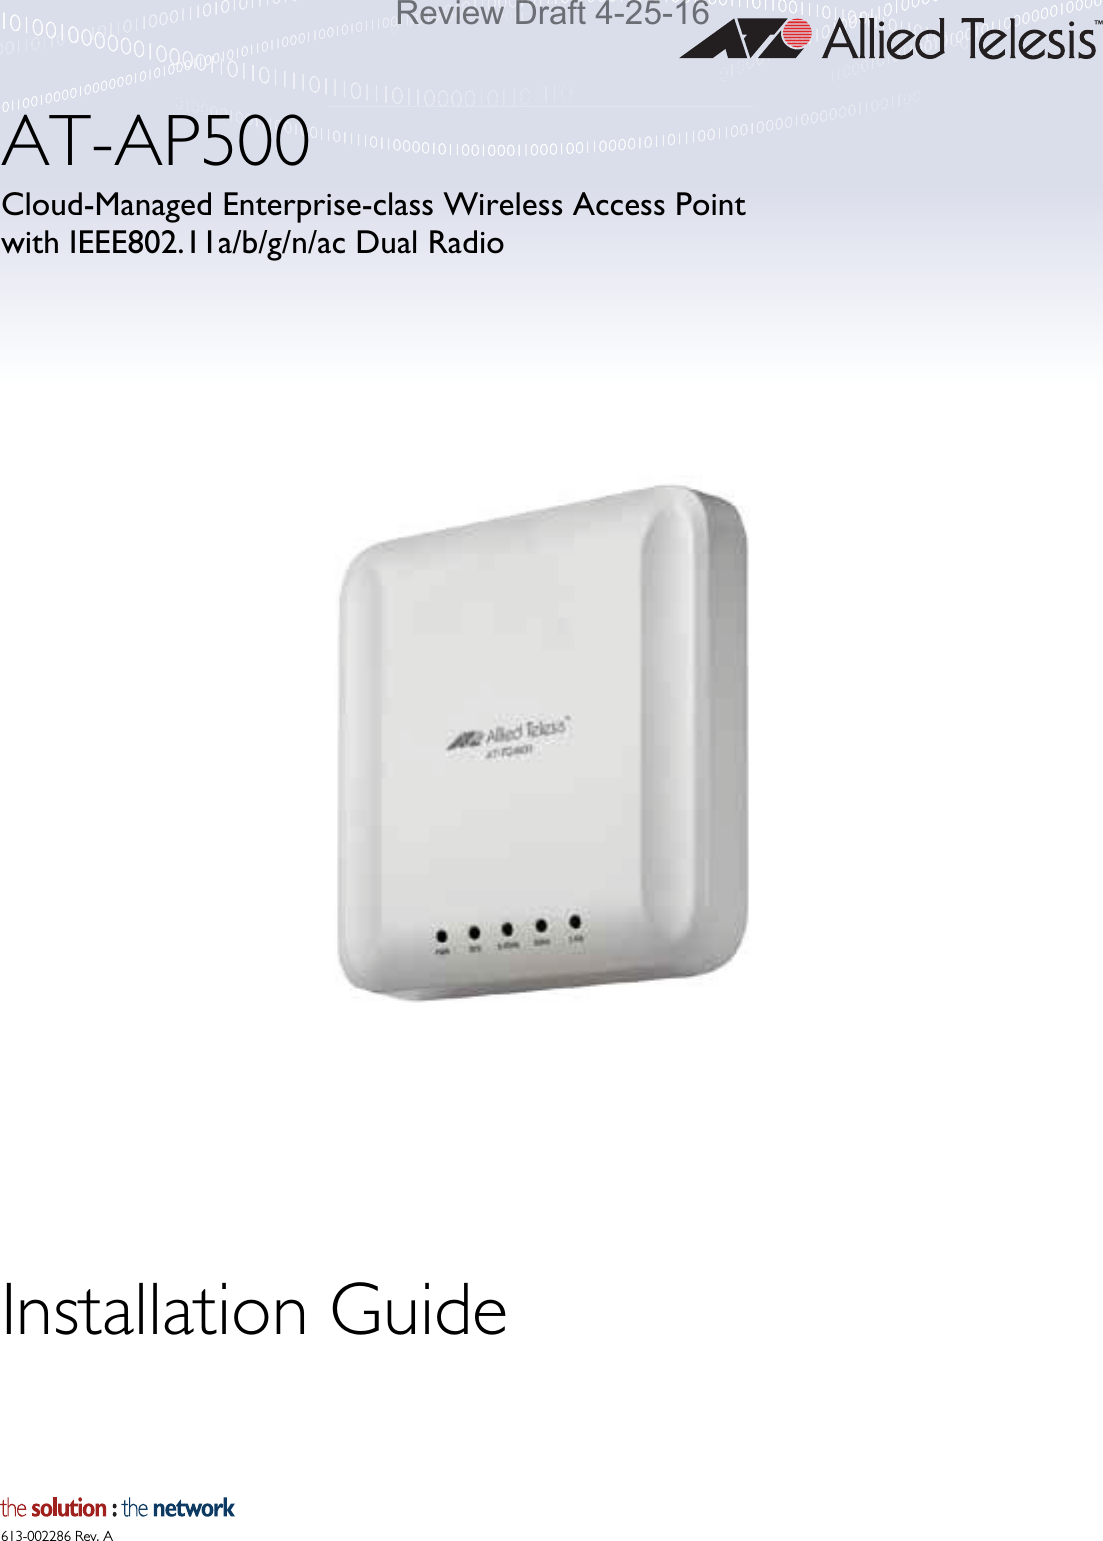 613-002286 Rev. AAT-AP500Cloud-Managed Enterprise-class Wireless Access Pointwith IEEE802.11a/b/g/n/ac Dual RadioInstallation GuideReview Draft 4-25-16